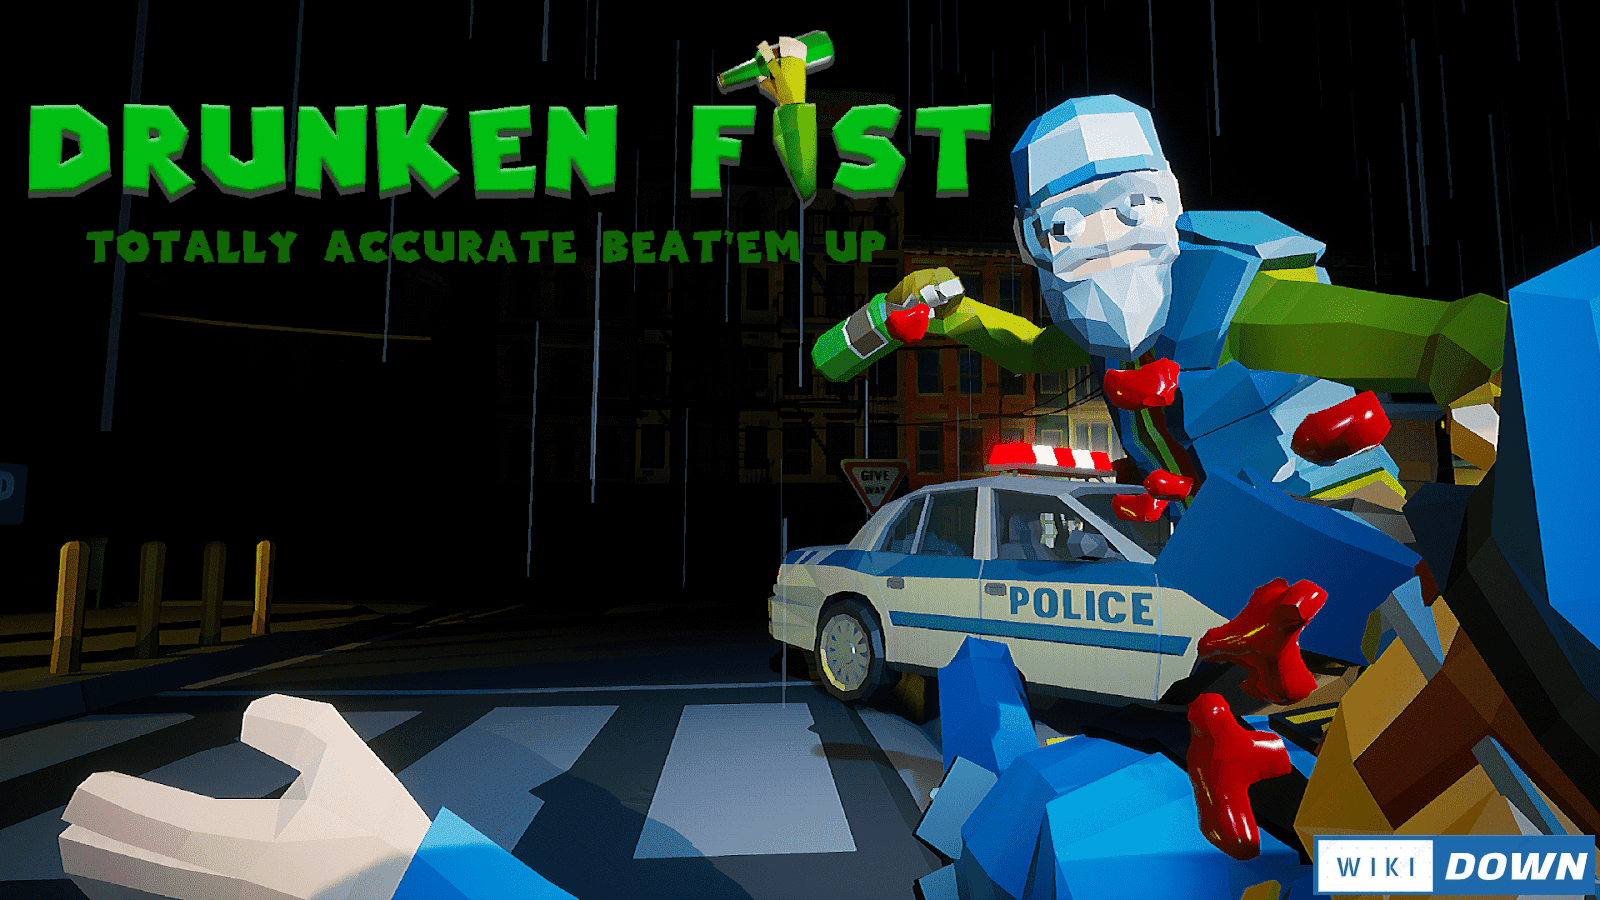 Download Drunken Fist Totally Accurate Beat ’em up Mới Nhất